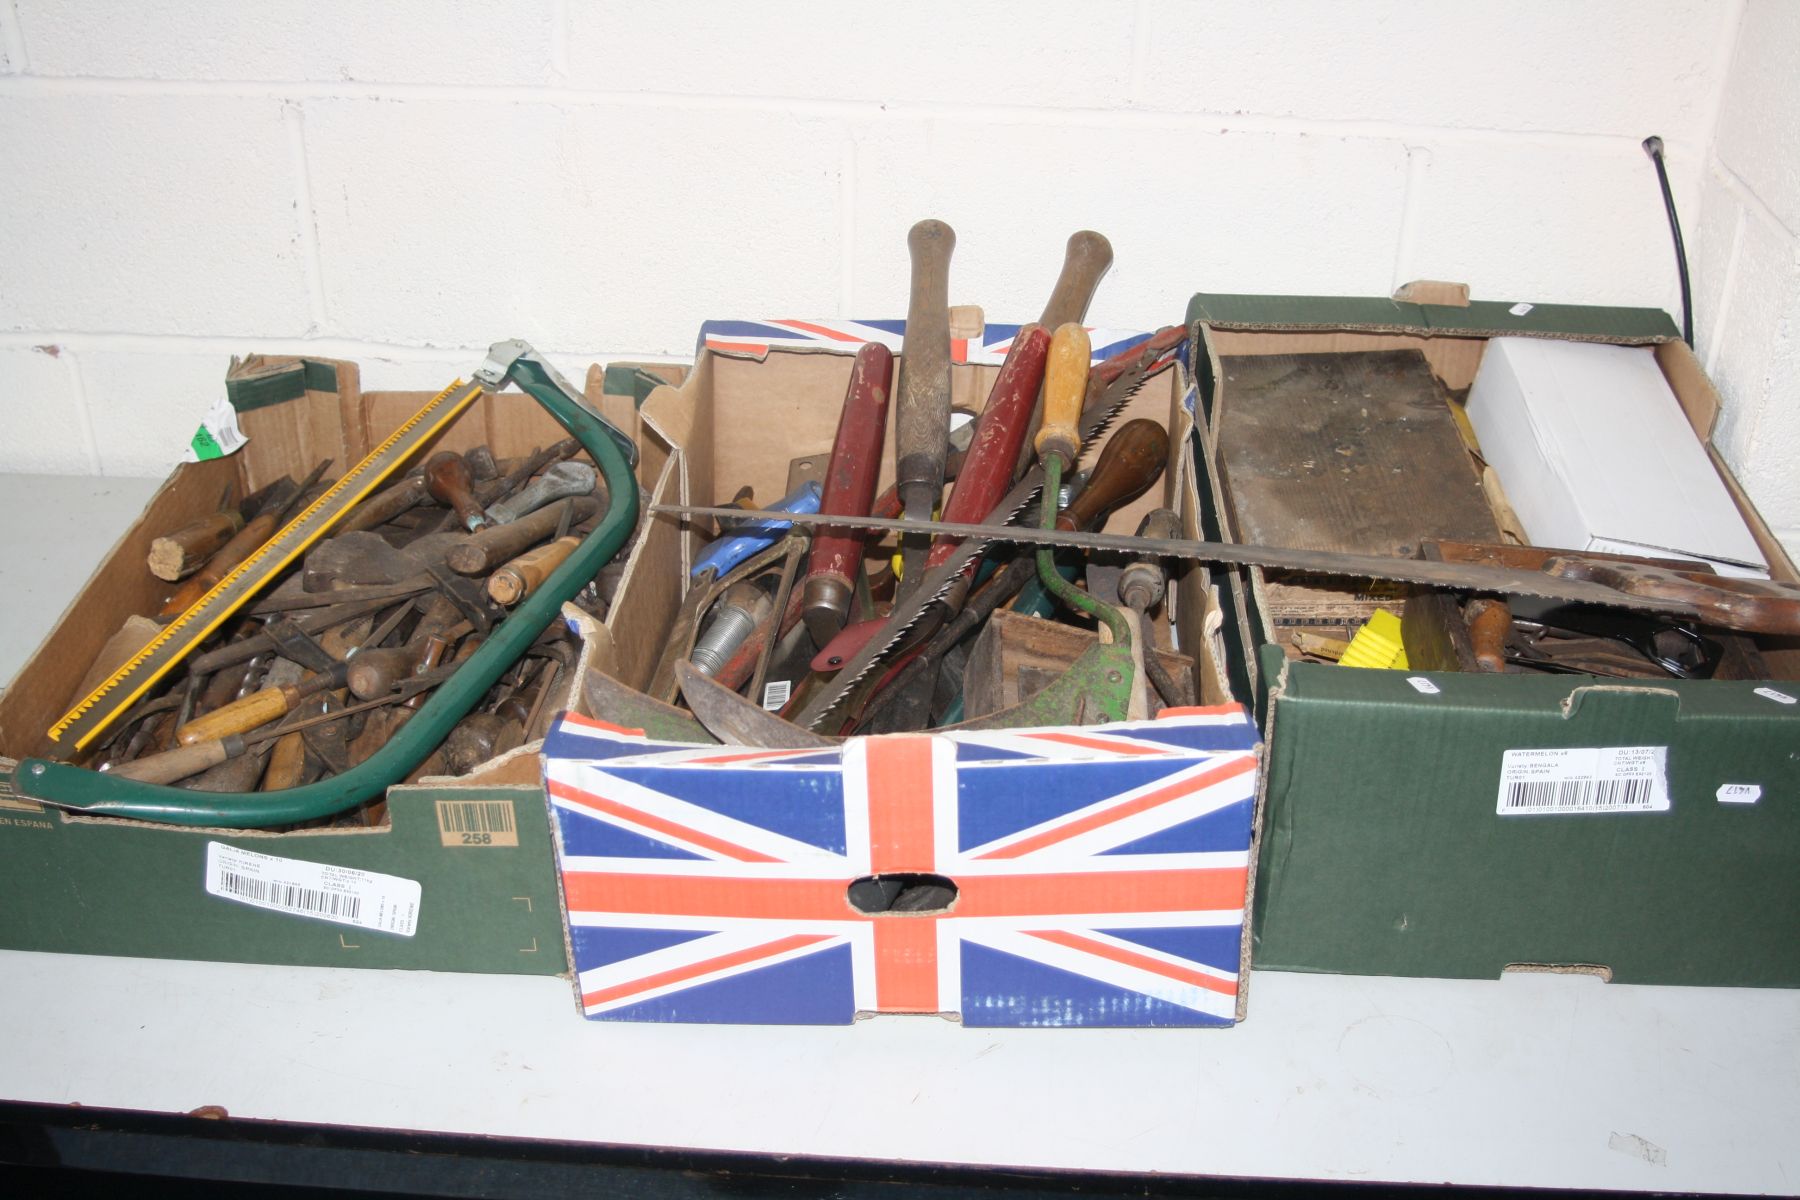 FIVE BOXES OF VARIOUS HAND TOOLS, to include planes, saws, hand sythes, files, chizels, hammers, - Image 2 of 14